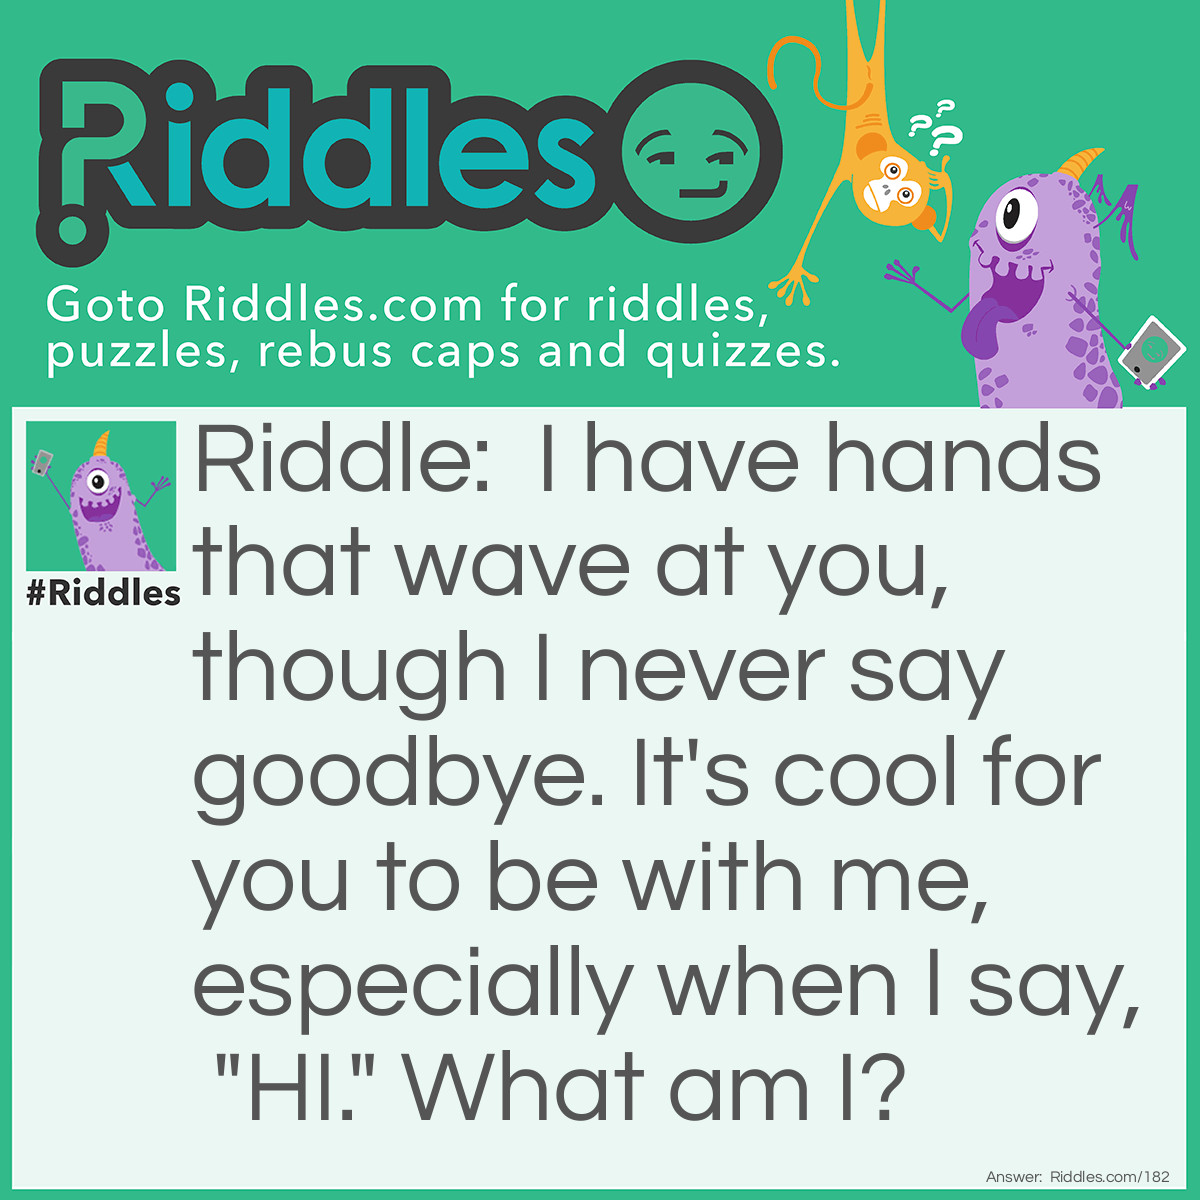 Riddle: I have hands that wave at you, though I never say goodbye. It's cool for you to be with me, especially when I say, "HI." What am I? Answer: An electric fan.